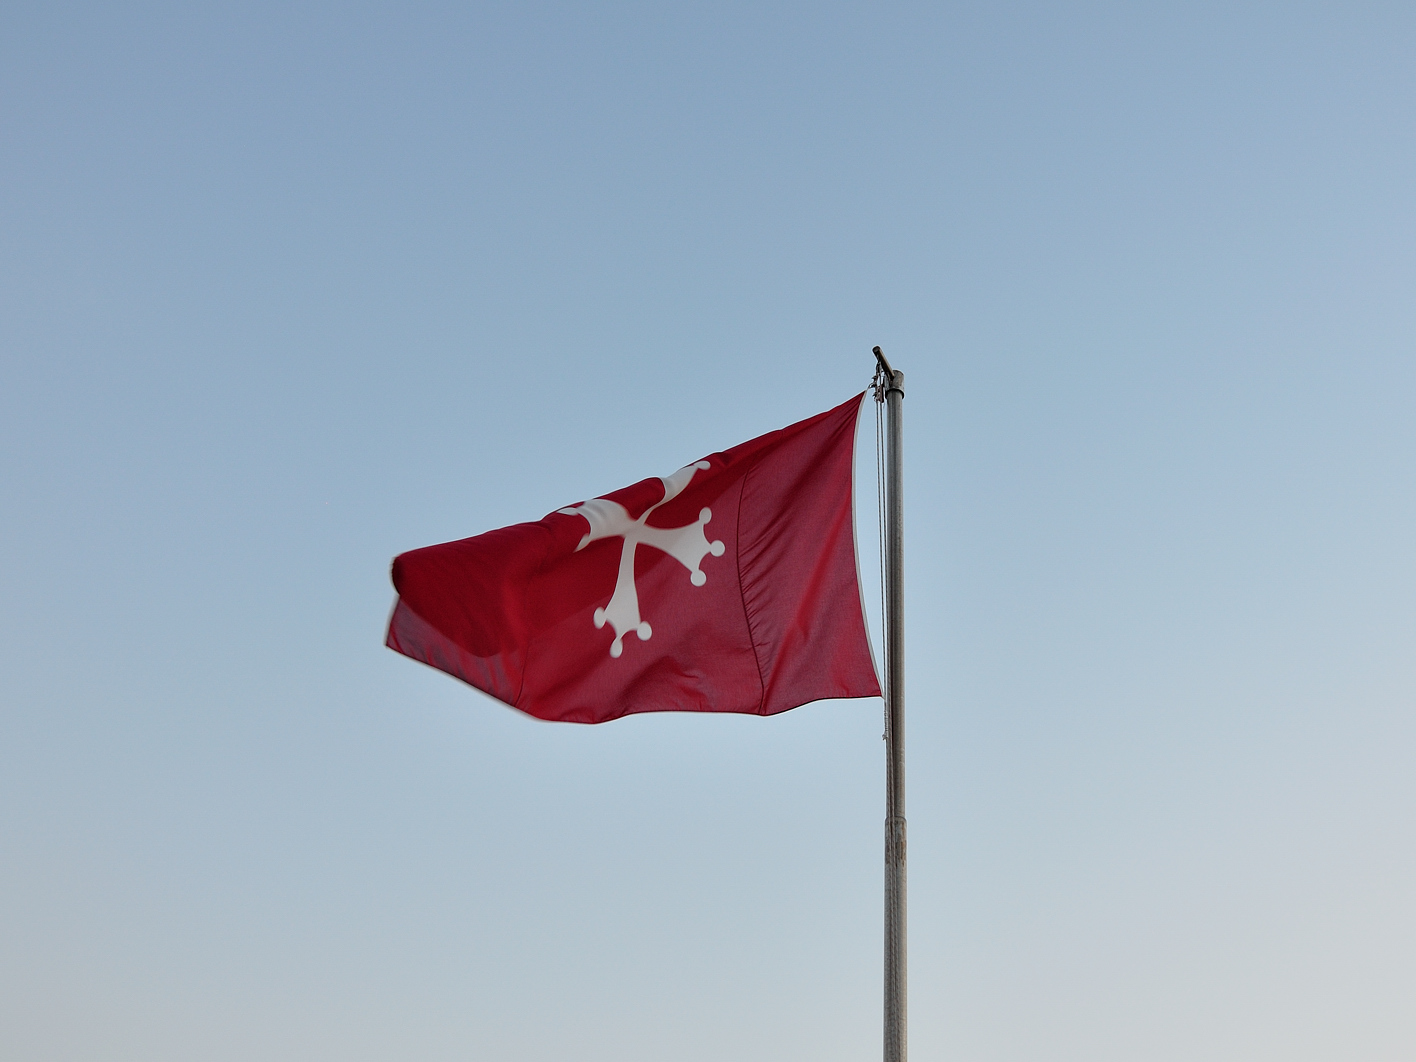 a flag waving on the top of a tall pole